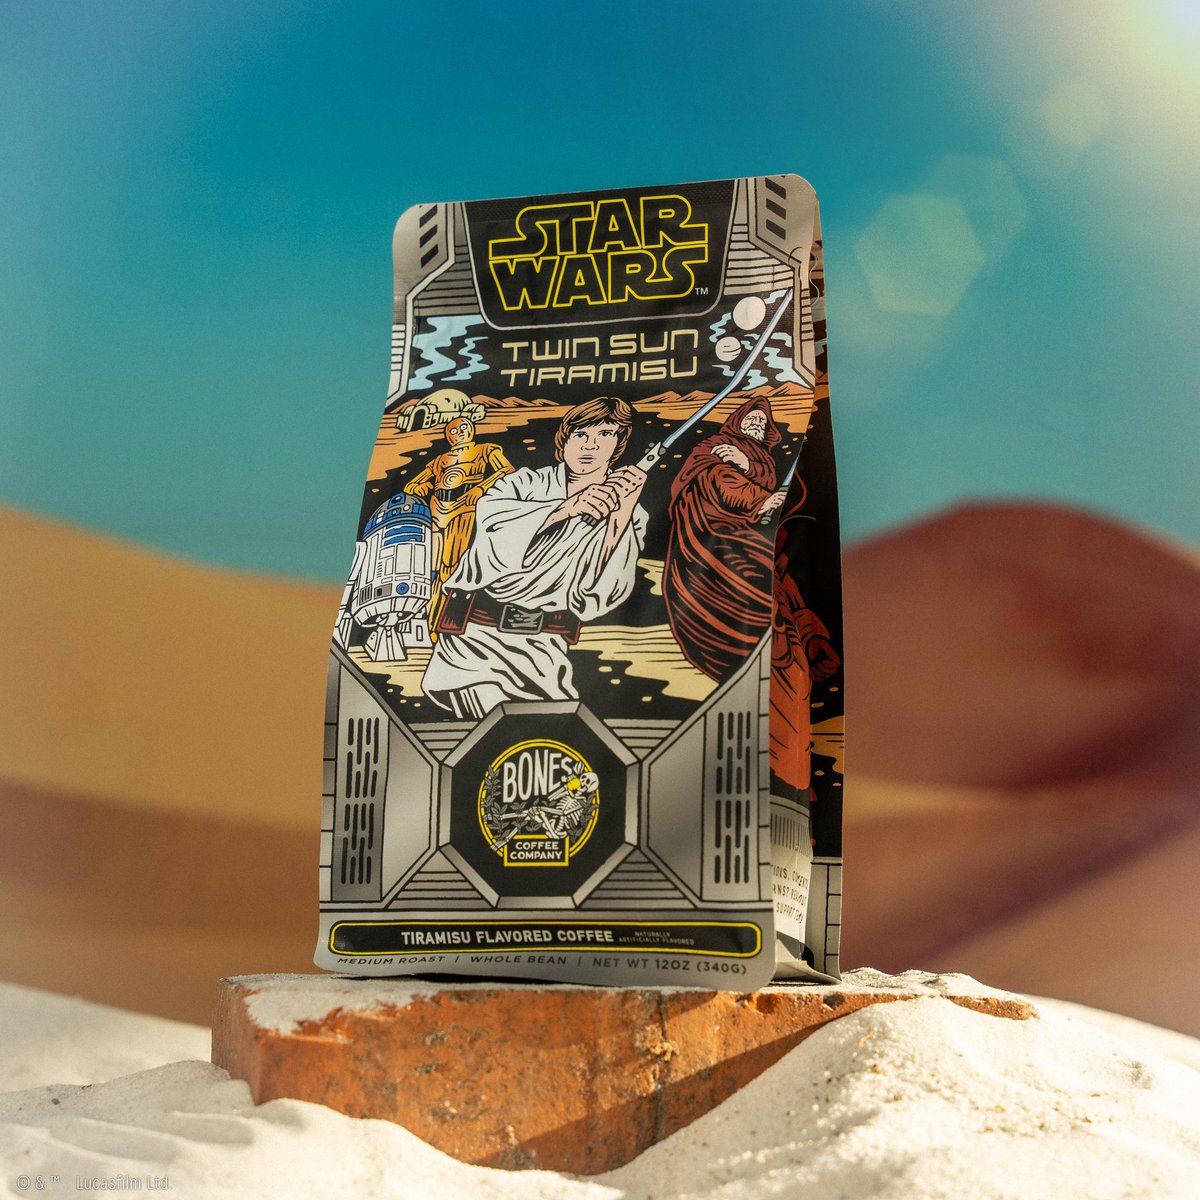 Awaken your taste buds with Twin Sun Tiramisu! ⭐☕ STAR WARS™ inspired coffee fused with rich flavors of mascarpone and cocoa! #StarWars *only available in the U.S., Puerto Rico, & Guam